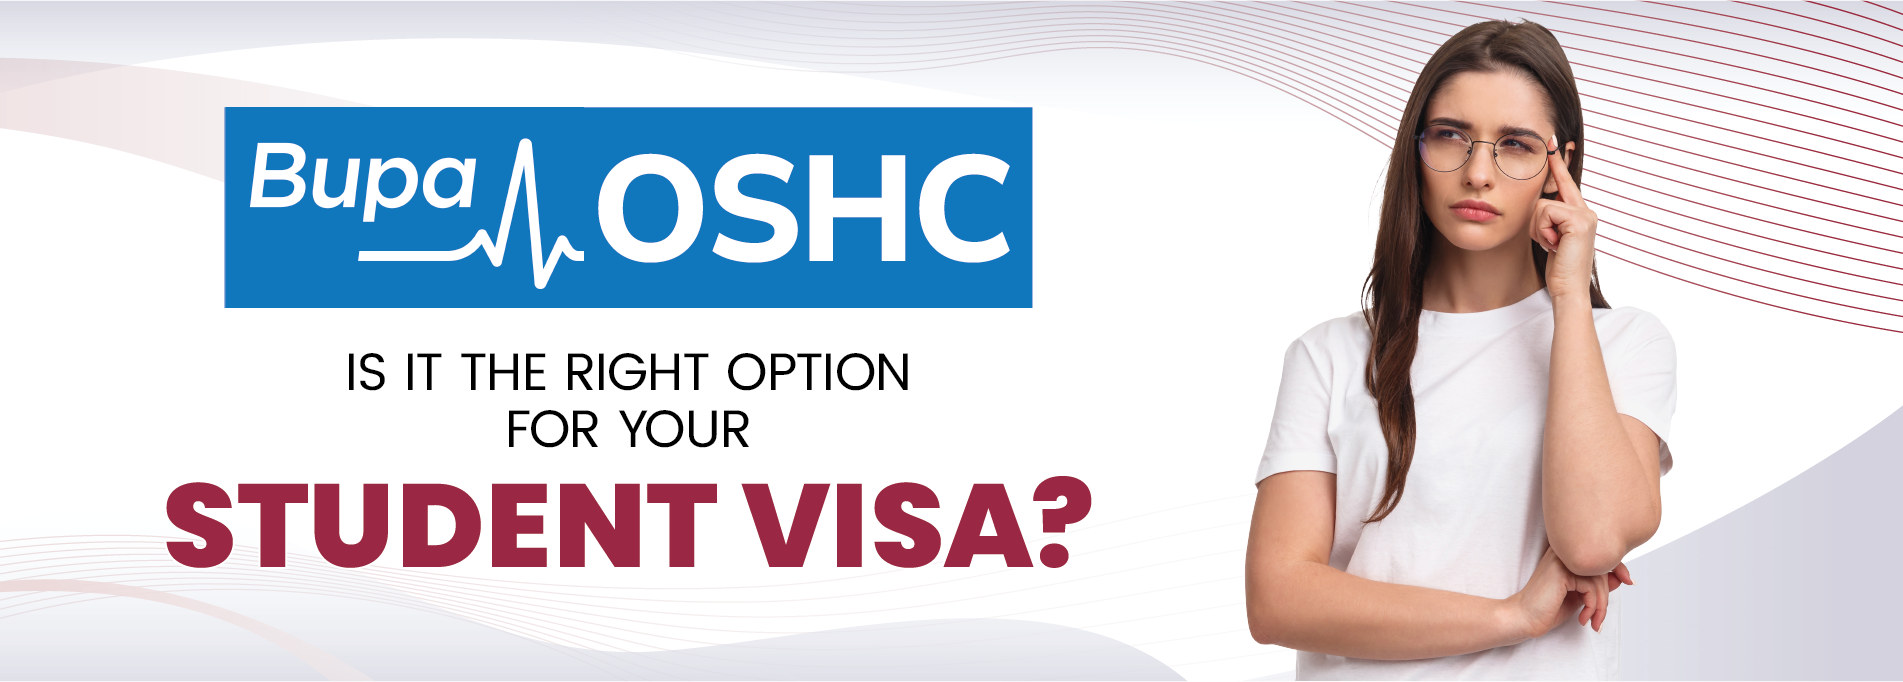 Bupa OSHC - Is it the Right Option for your Student Visa?